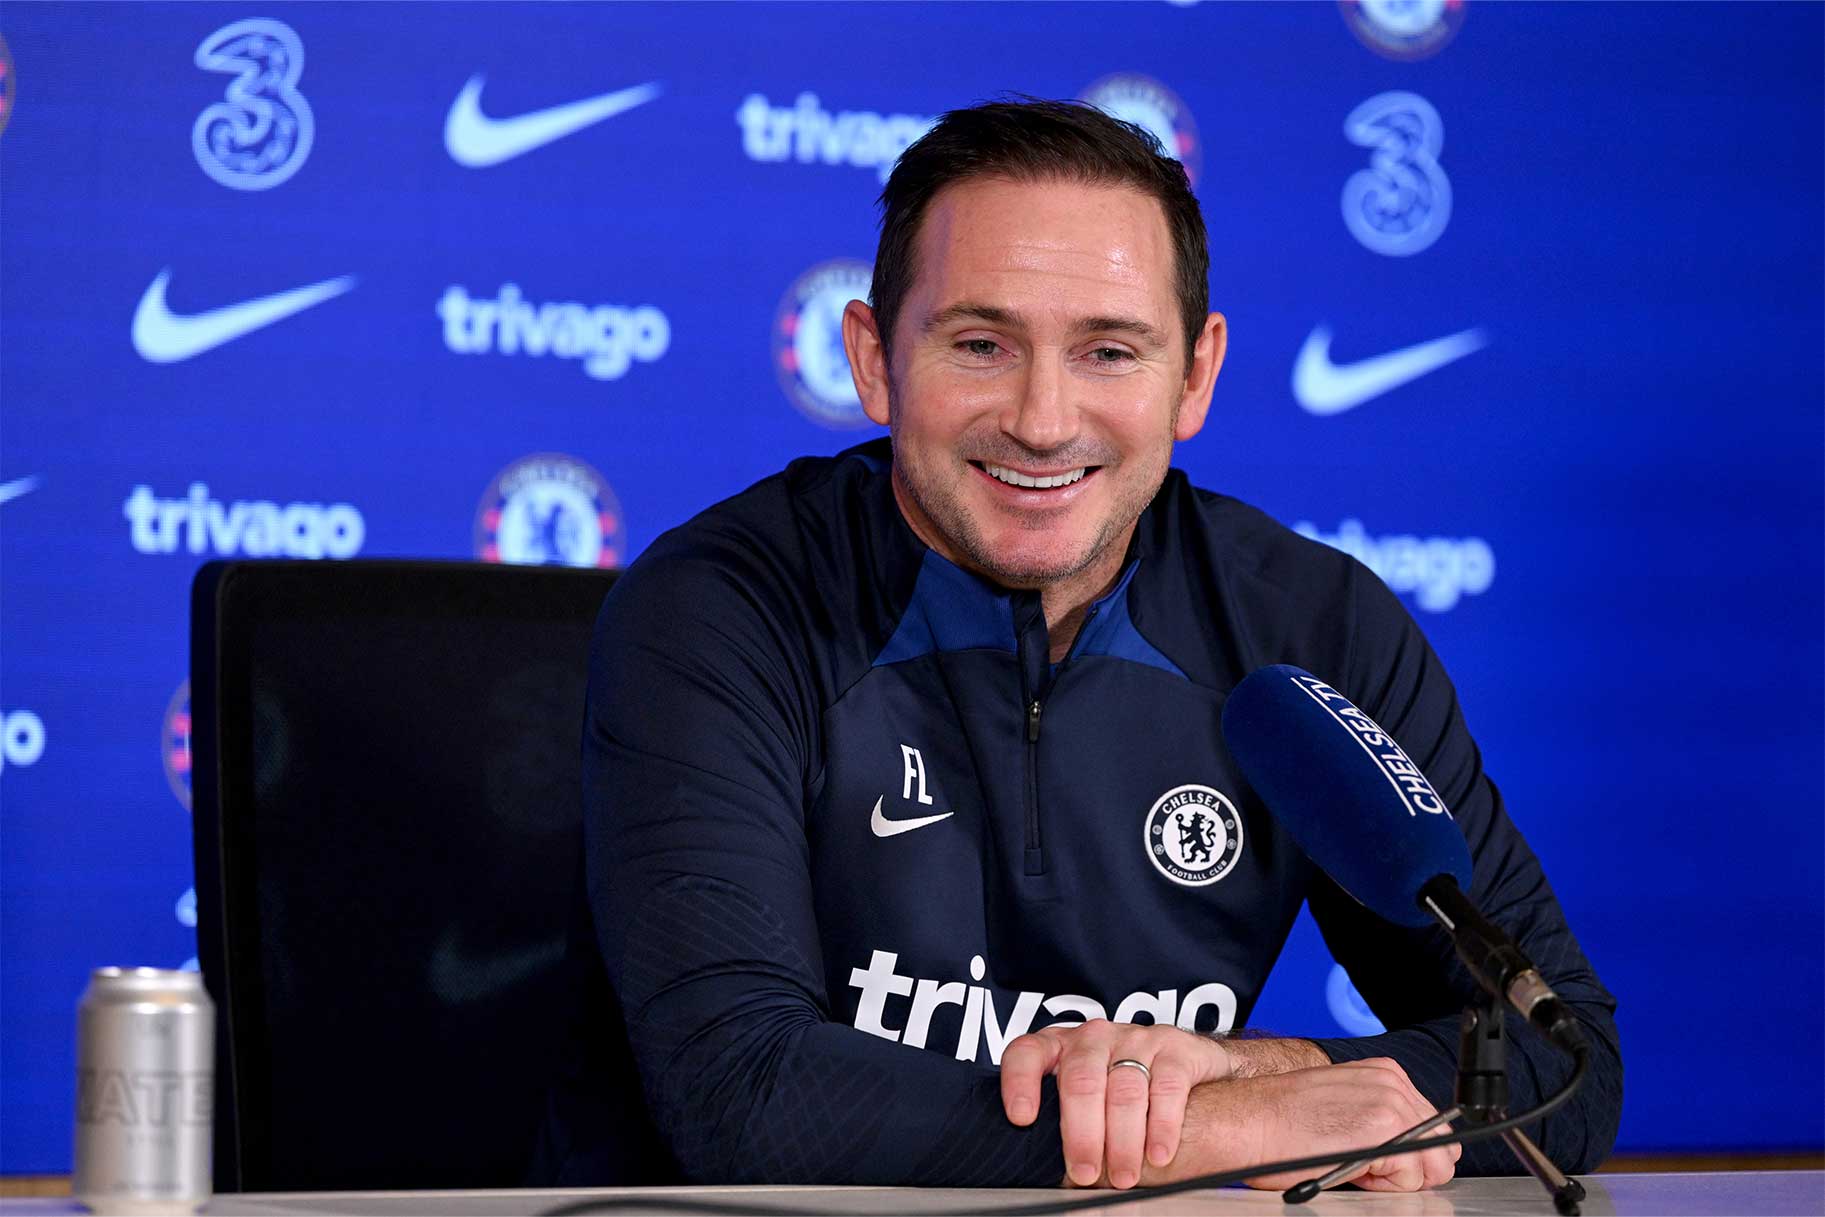 Caretaker manager Frank Lampard of Chelsea talks during a press conference at Chelsea Training Ground